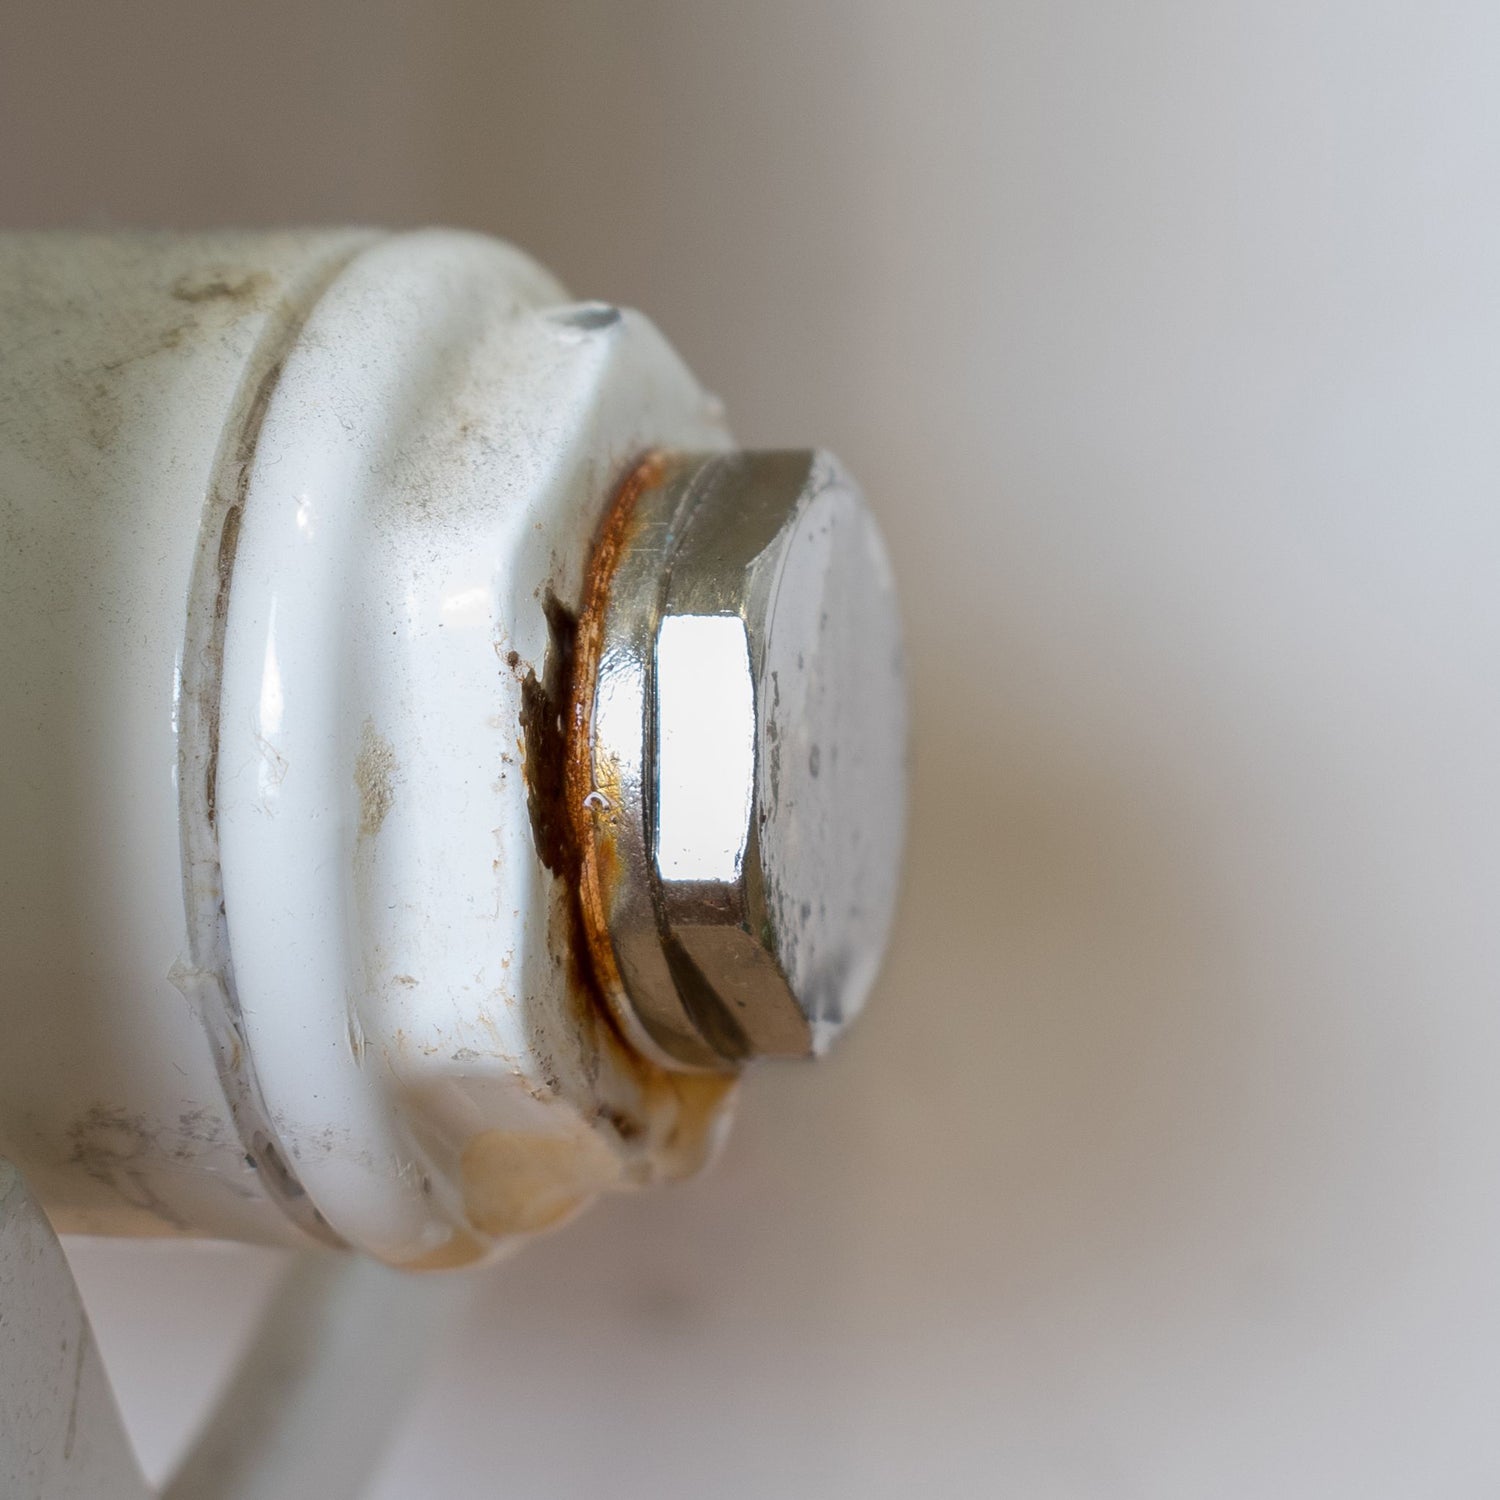 How to replace a radiator bleed valve.....